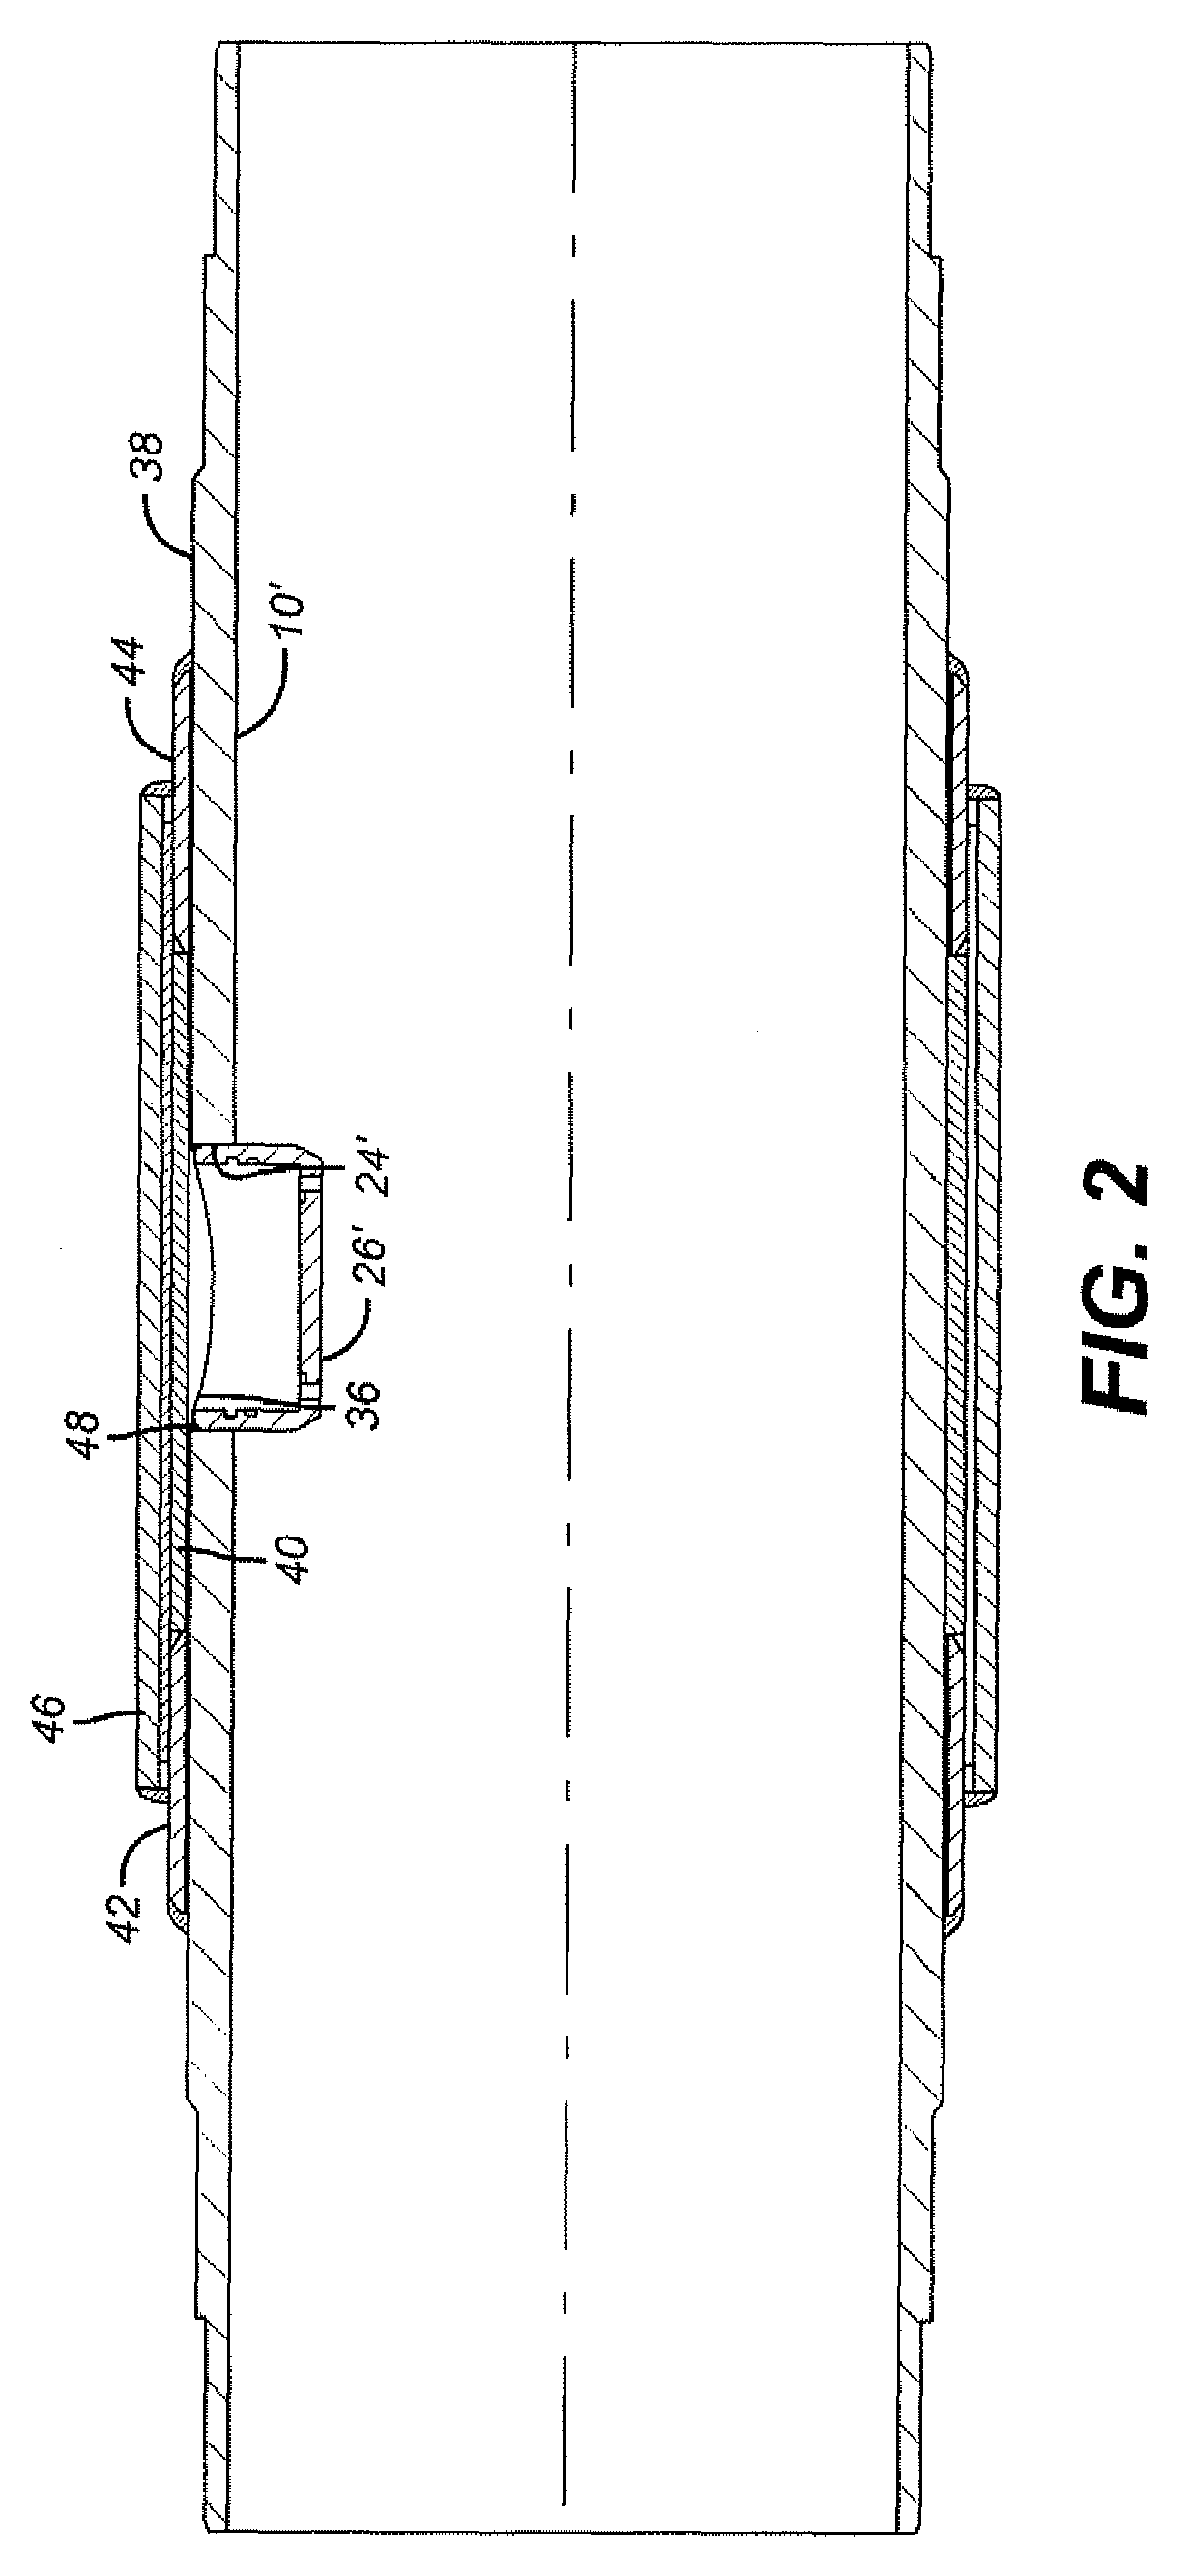 Restrictor valve mounting for downhole screens